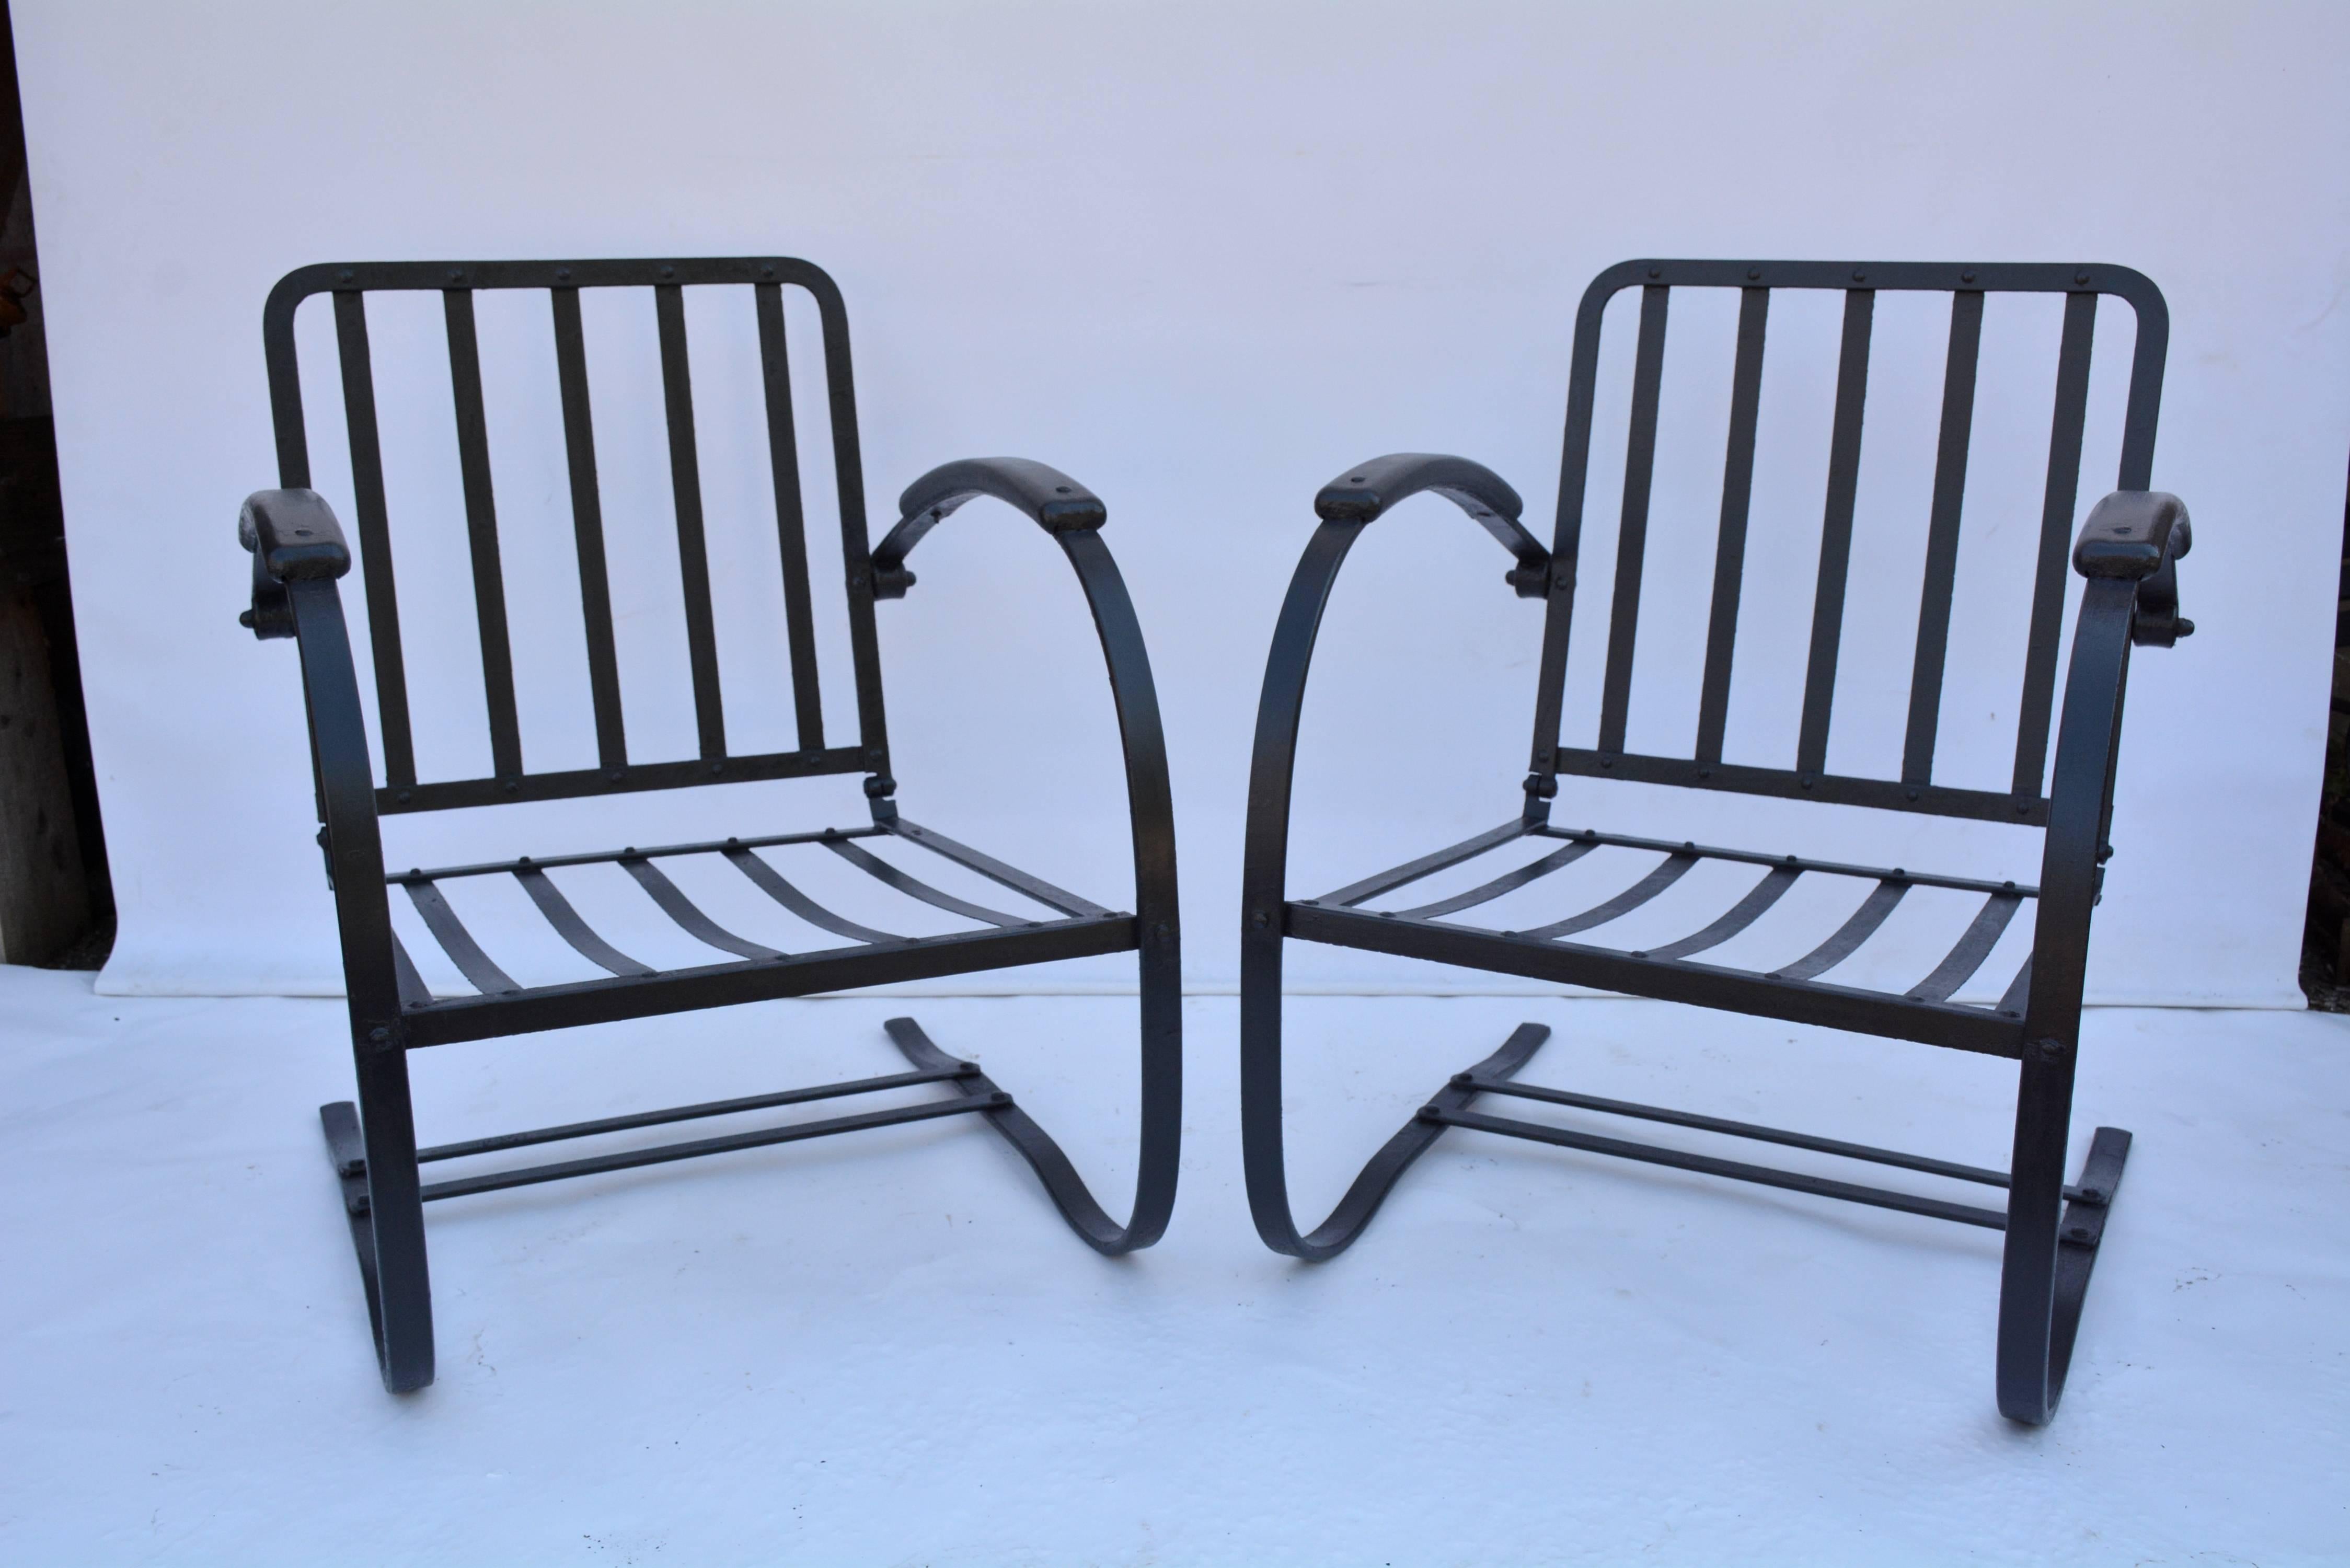 Comfortable and inviting black metal garden or porch arm chairs have a spring action for added comfort. The arms are 